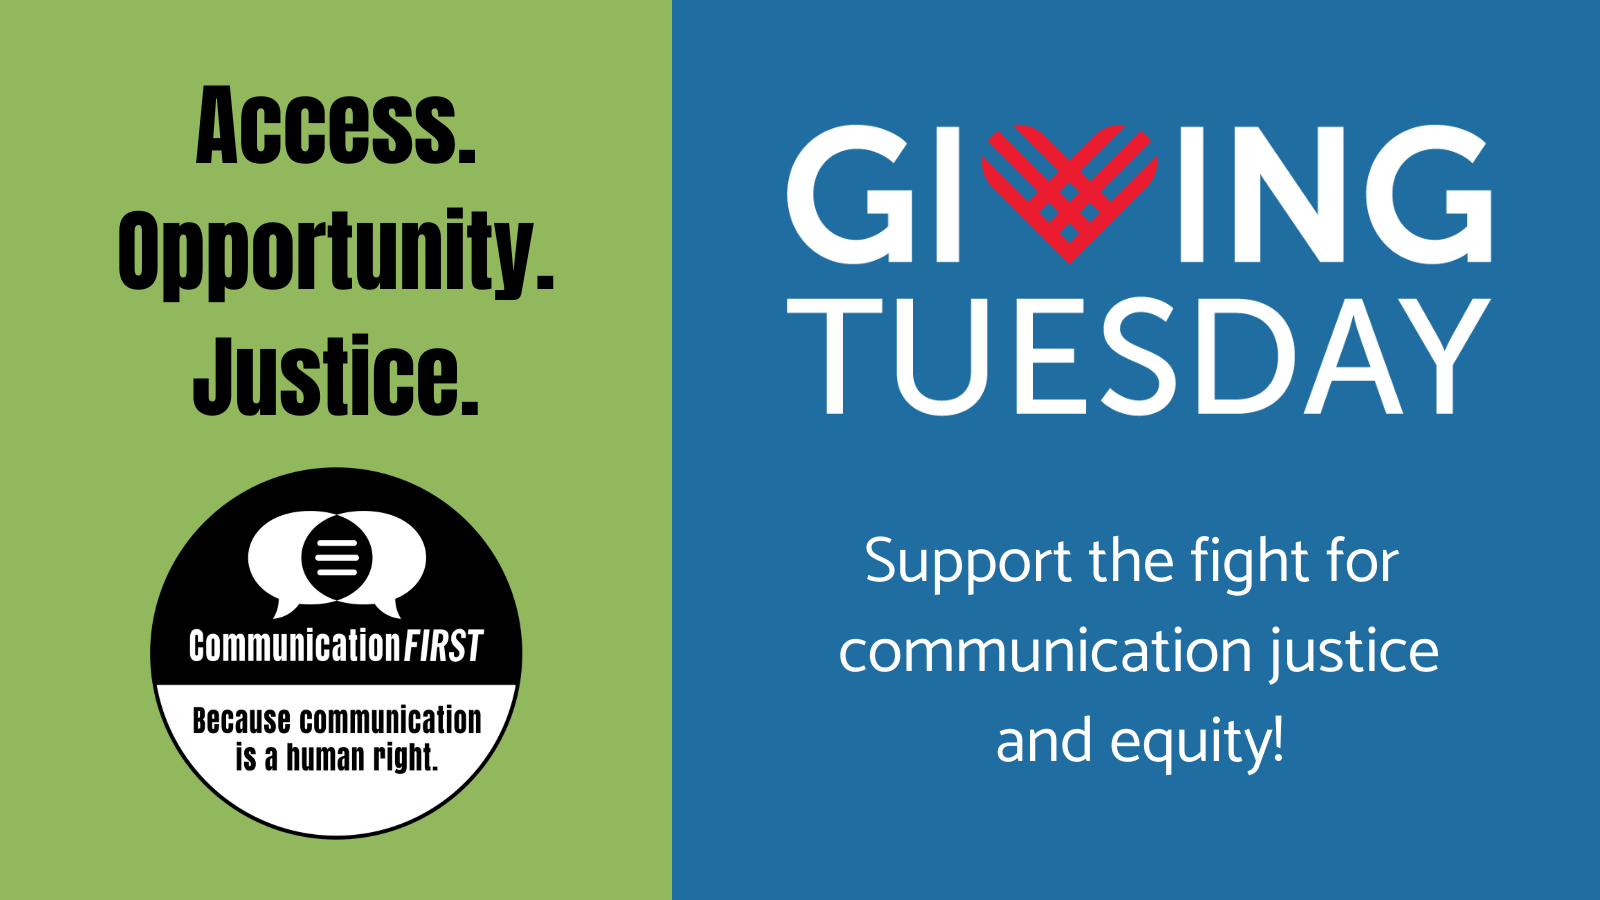 "Access. Opportunity. Justice." is written above the round CommunicationFIRST logo in black and white, with the tagline "Because communication is a human right." On the right is the Giving Tuesday logo and the words: "Support the fight for communication justice and equity!"